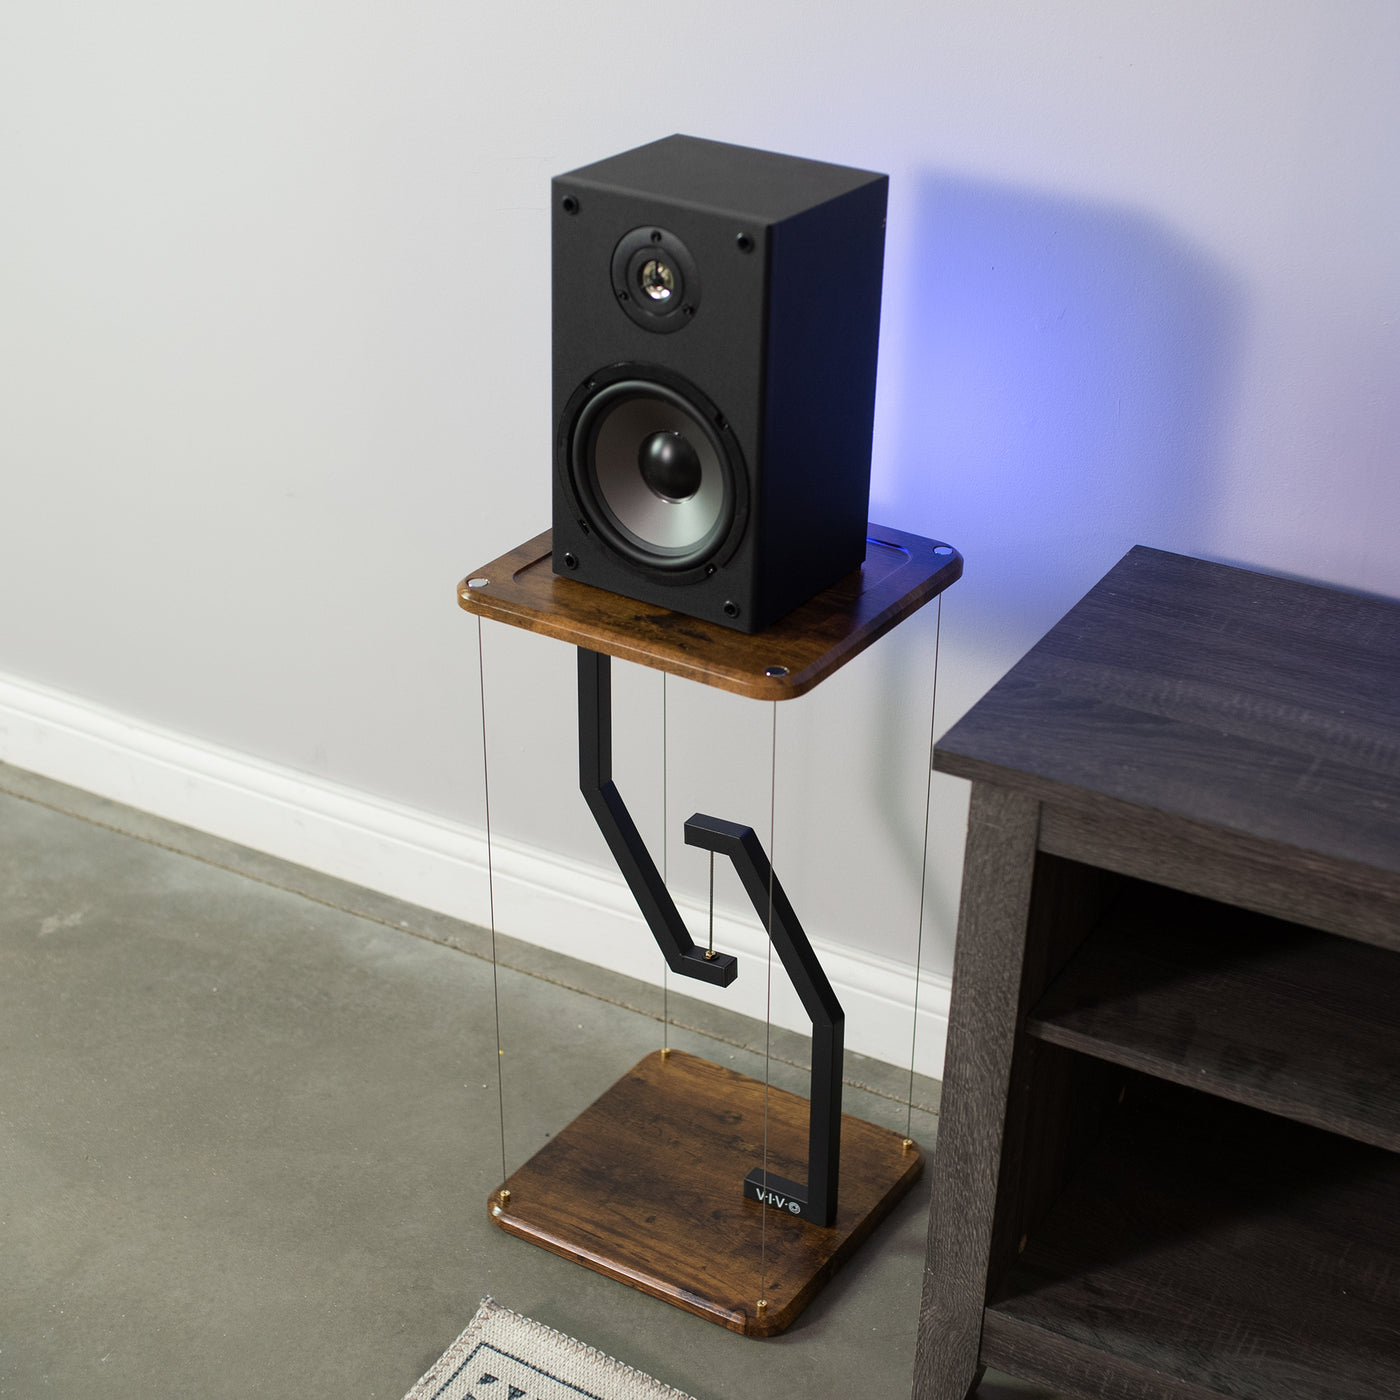 Rustic floating tensegrity speaker floor stand for enhanced sound system.